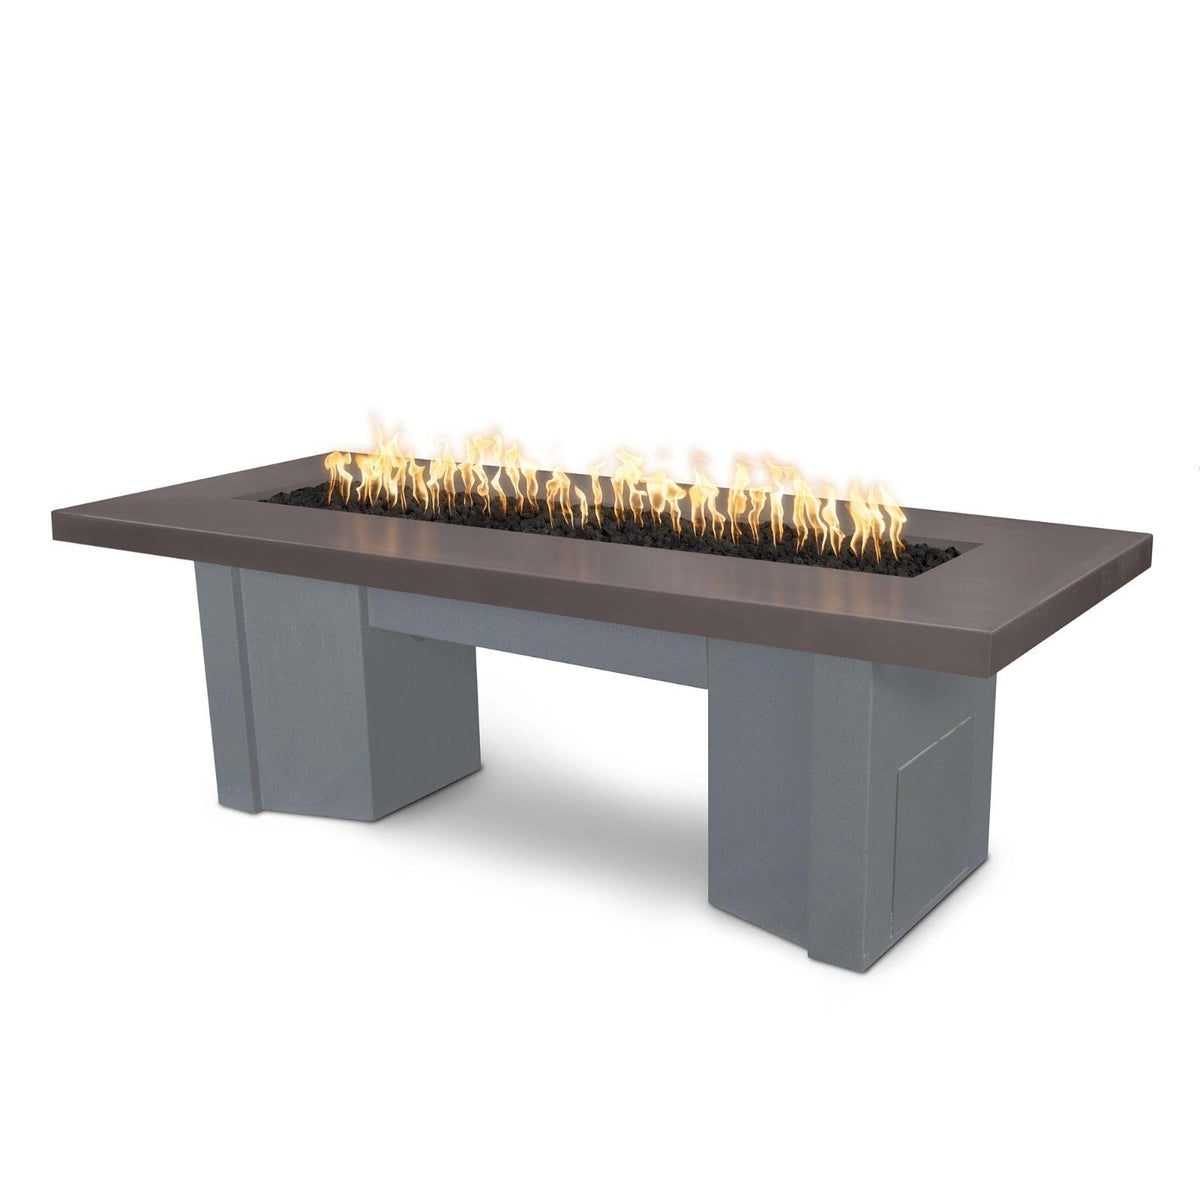 The Outdoor Plus Fire Features Chestnut (-CST) / Gray Powder Coated Steel (-GRY) The Outdoor Plus 60&quot; Alameda Fire Table Smooth Concrete in Liquid Propane - Flame Sense System with Push Button Spark Igniter / OPT-ALMGFRC60FSEN-LP